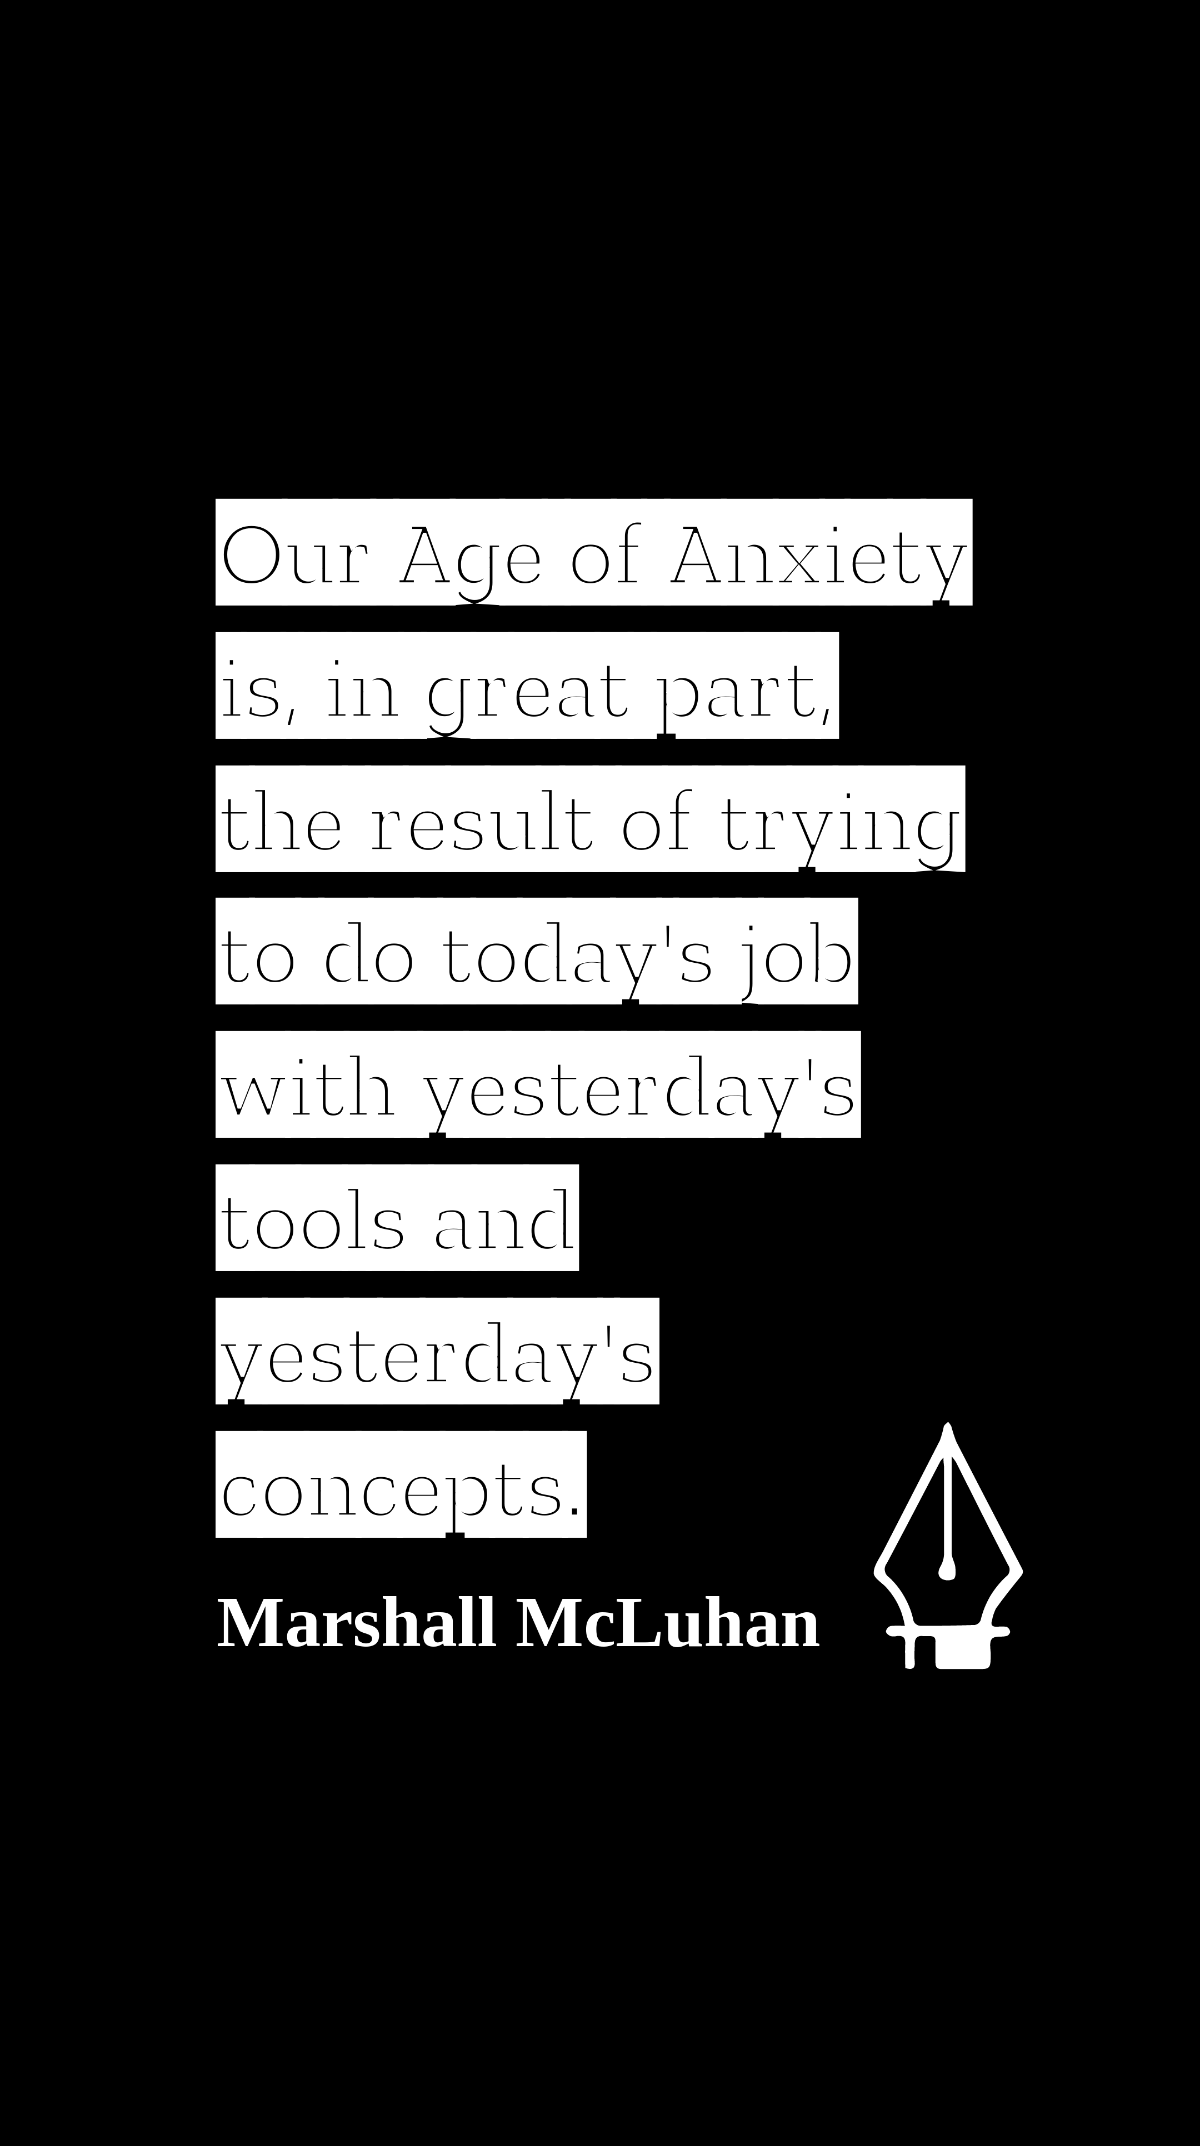 Marshall McLuhan - Our Age of Anxiety is, in great part, the result of trying to do today's job with yesterday's tools and yesterday's concepts.